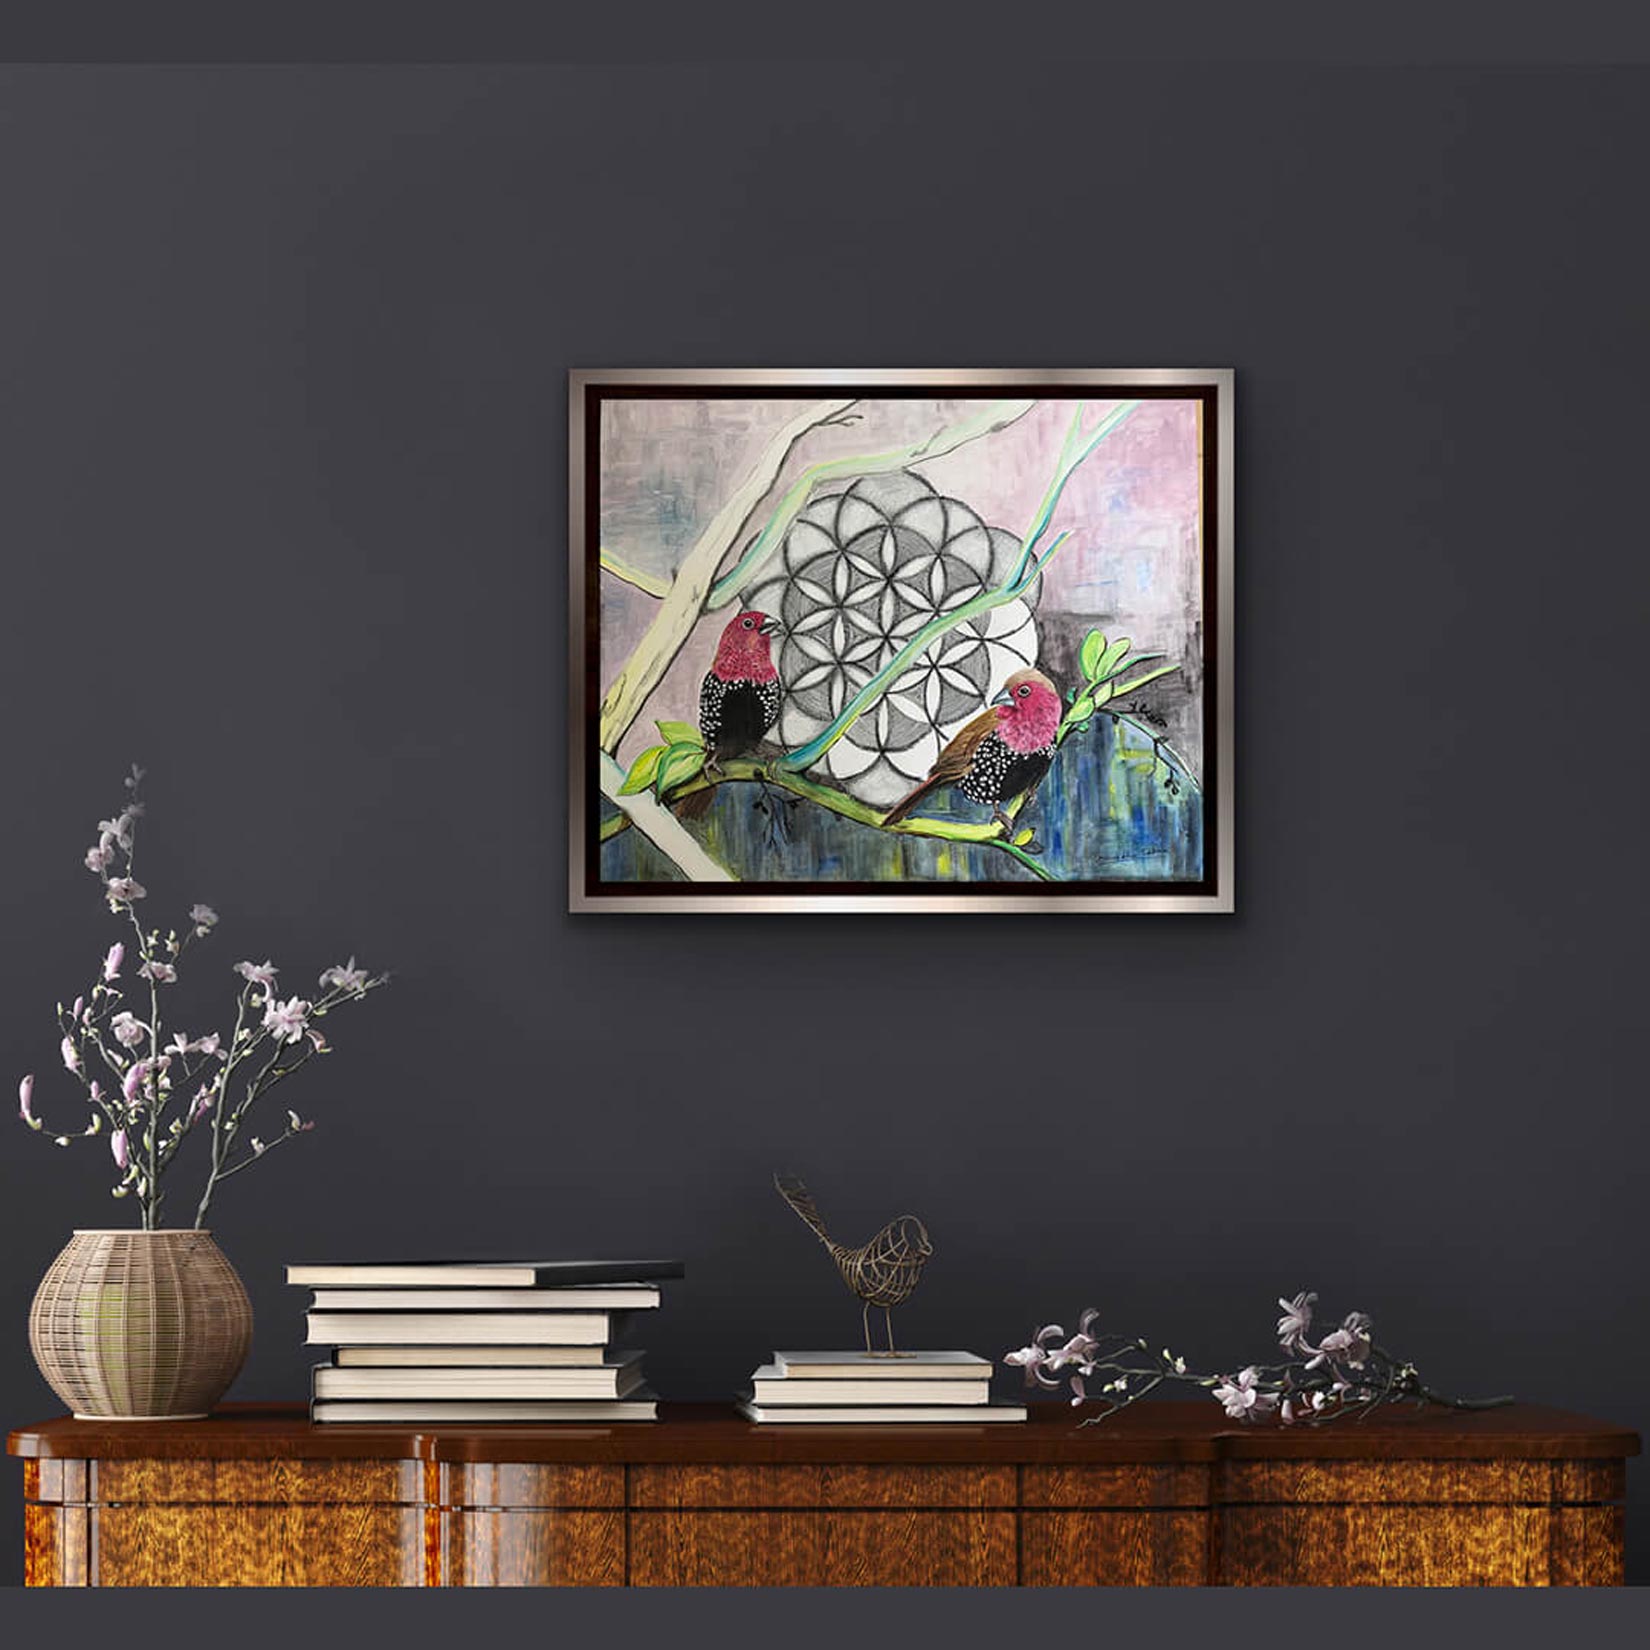 Buy painting online Singapore Flower of Life Pink-Throated Twin Spots Anuradha Kabra India Exquisite Art